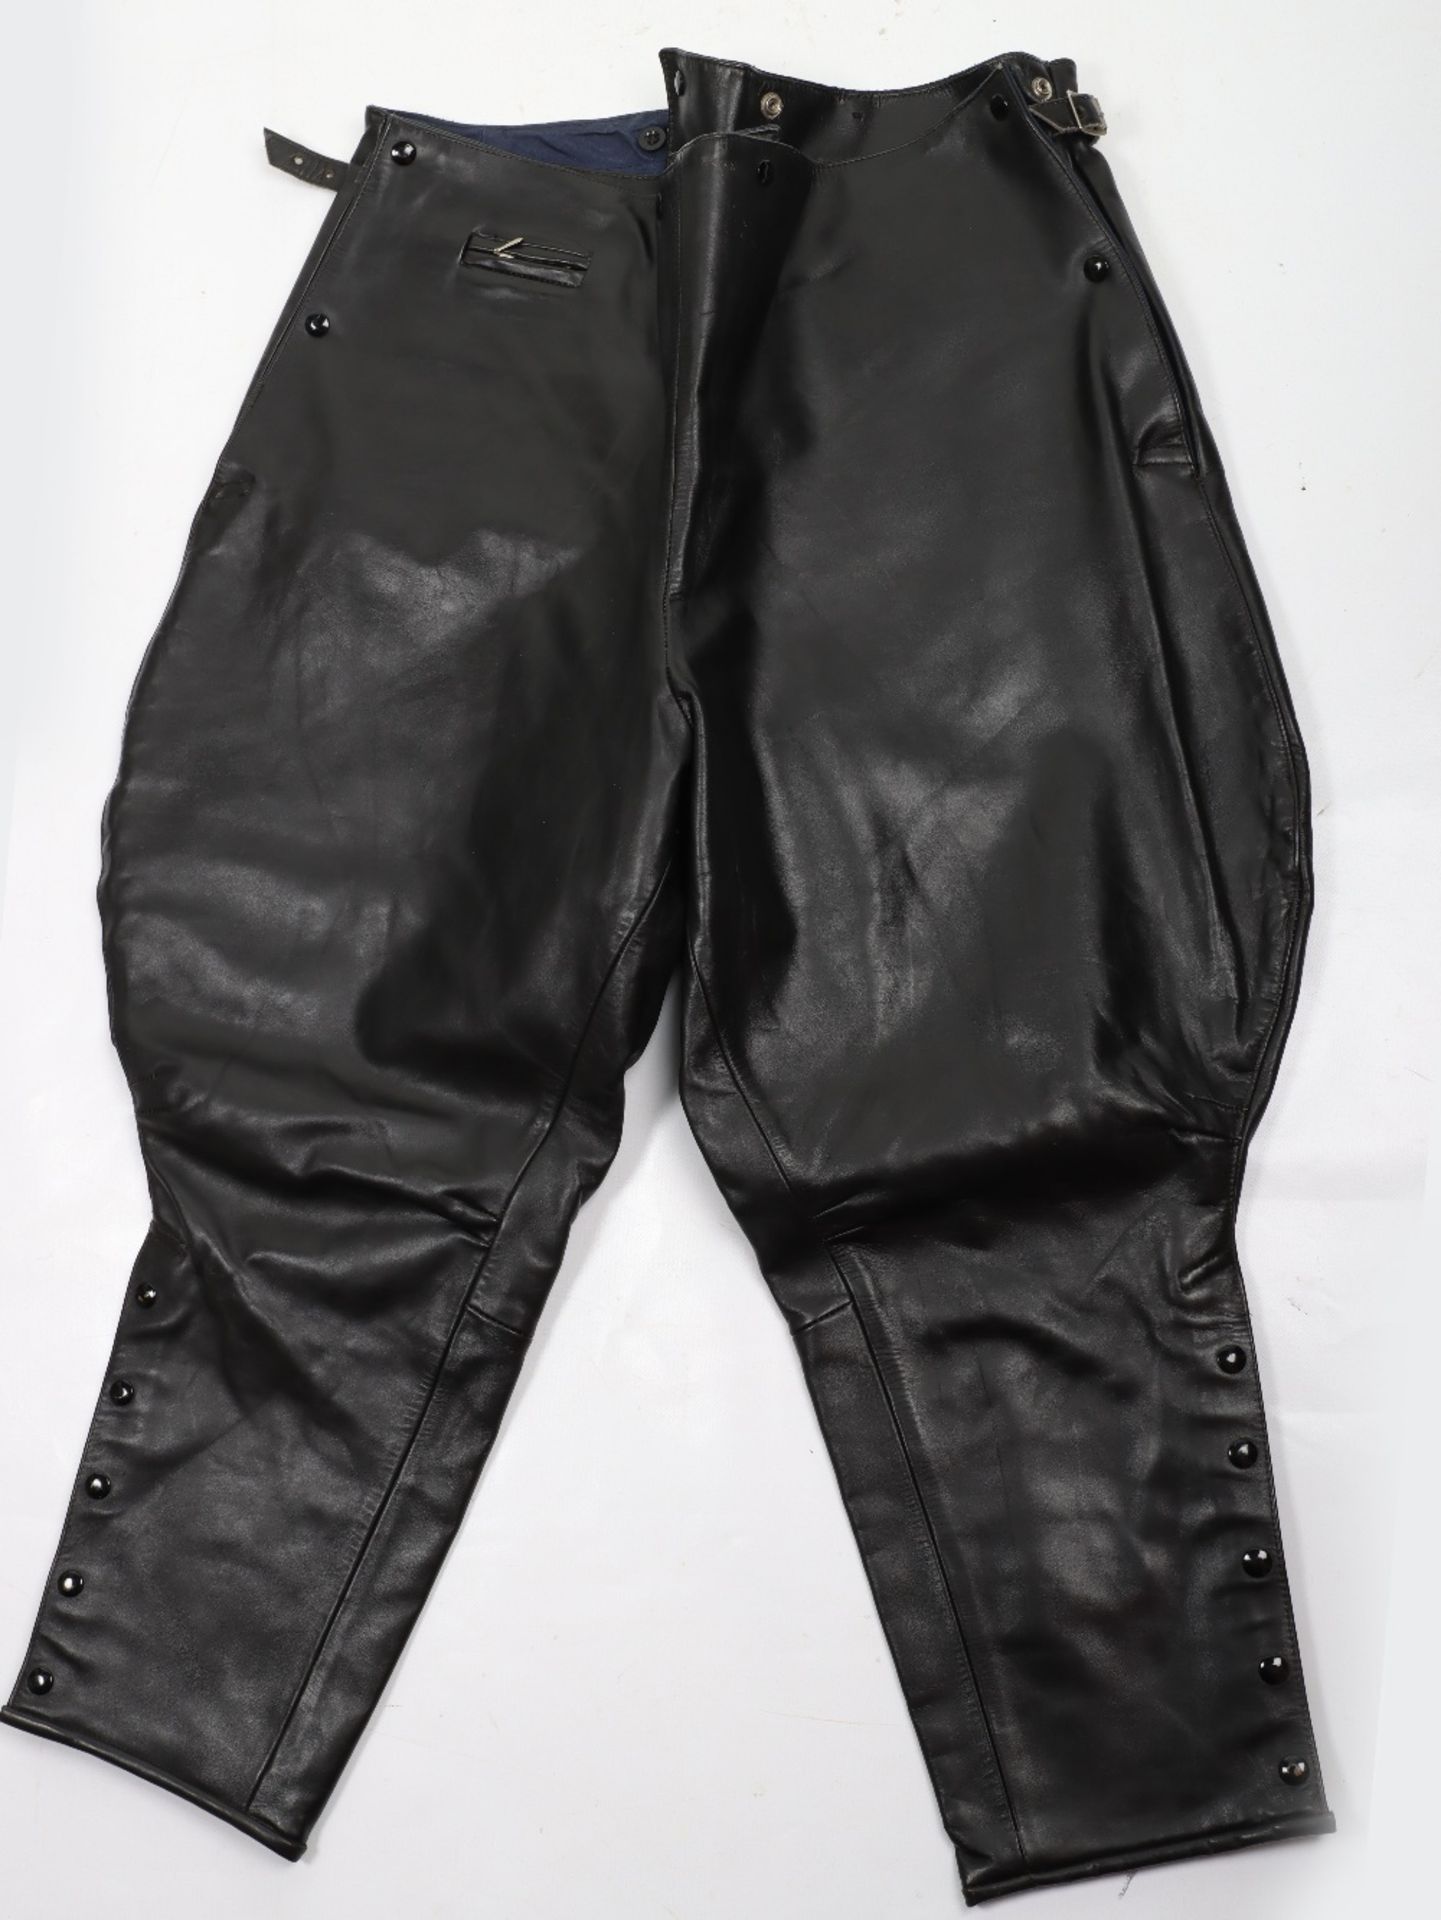 Pair of German Air Force Grey Leather Trousers - Image 2 of 3